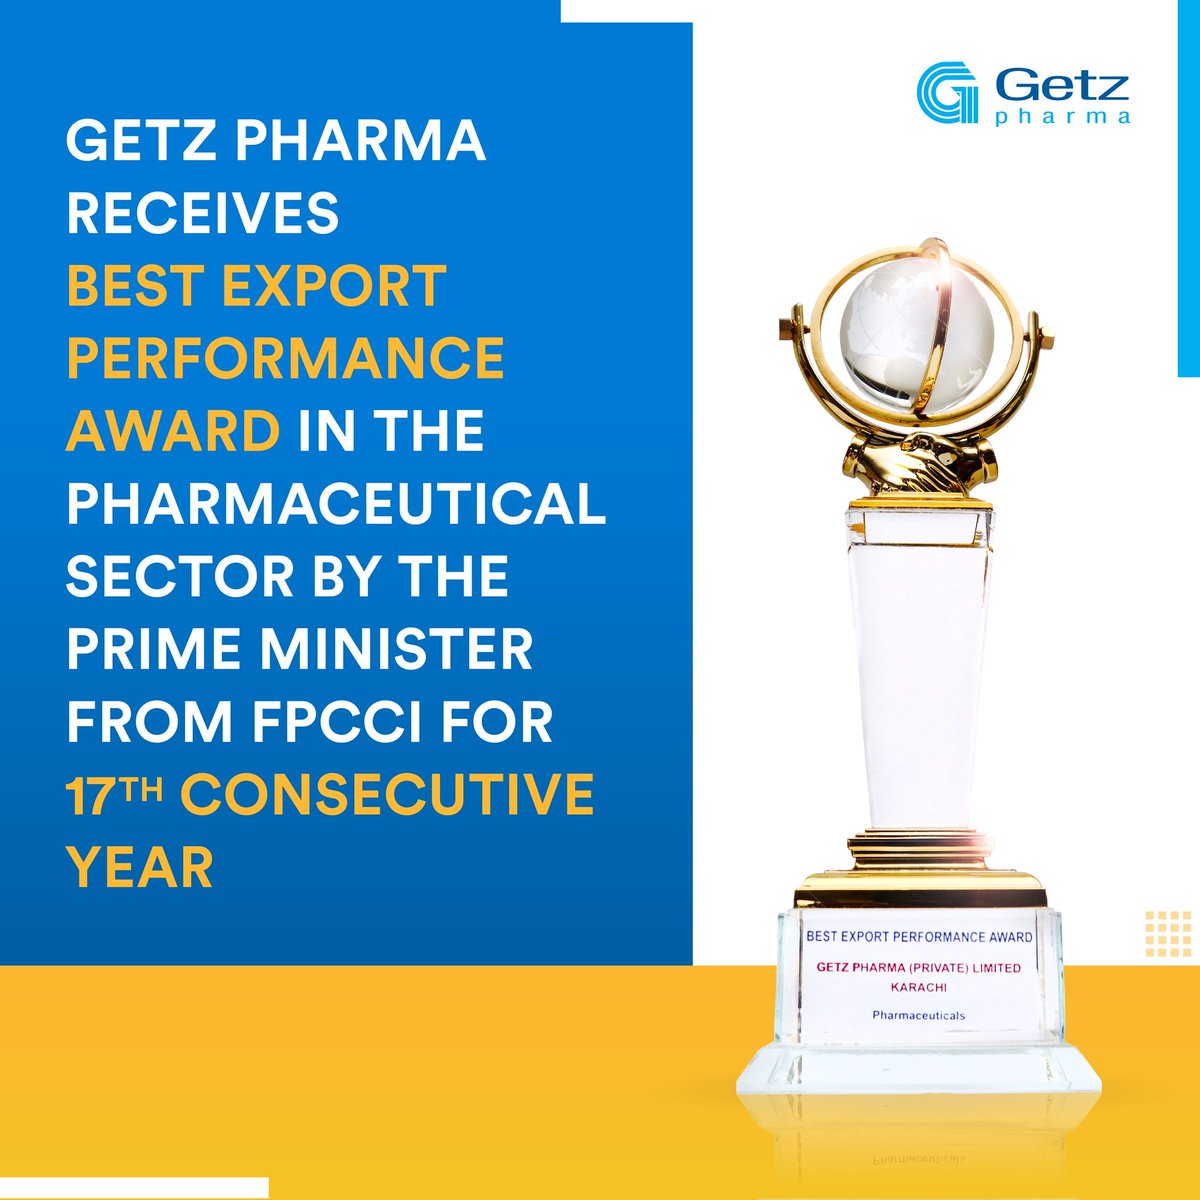 [#UPDATE] 

Achiever of Pharma✨

The PM of🇵🇰 has awarded #GetzPharma with the Highest Export Performance Award in the pharmaceutical sector at the @FPCCI1 awards.

Currently exporting to 30+ countries, company has been receiving this accolade for the past 17 consecutive yrs.